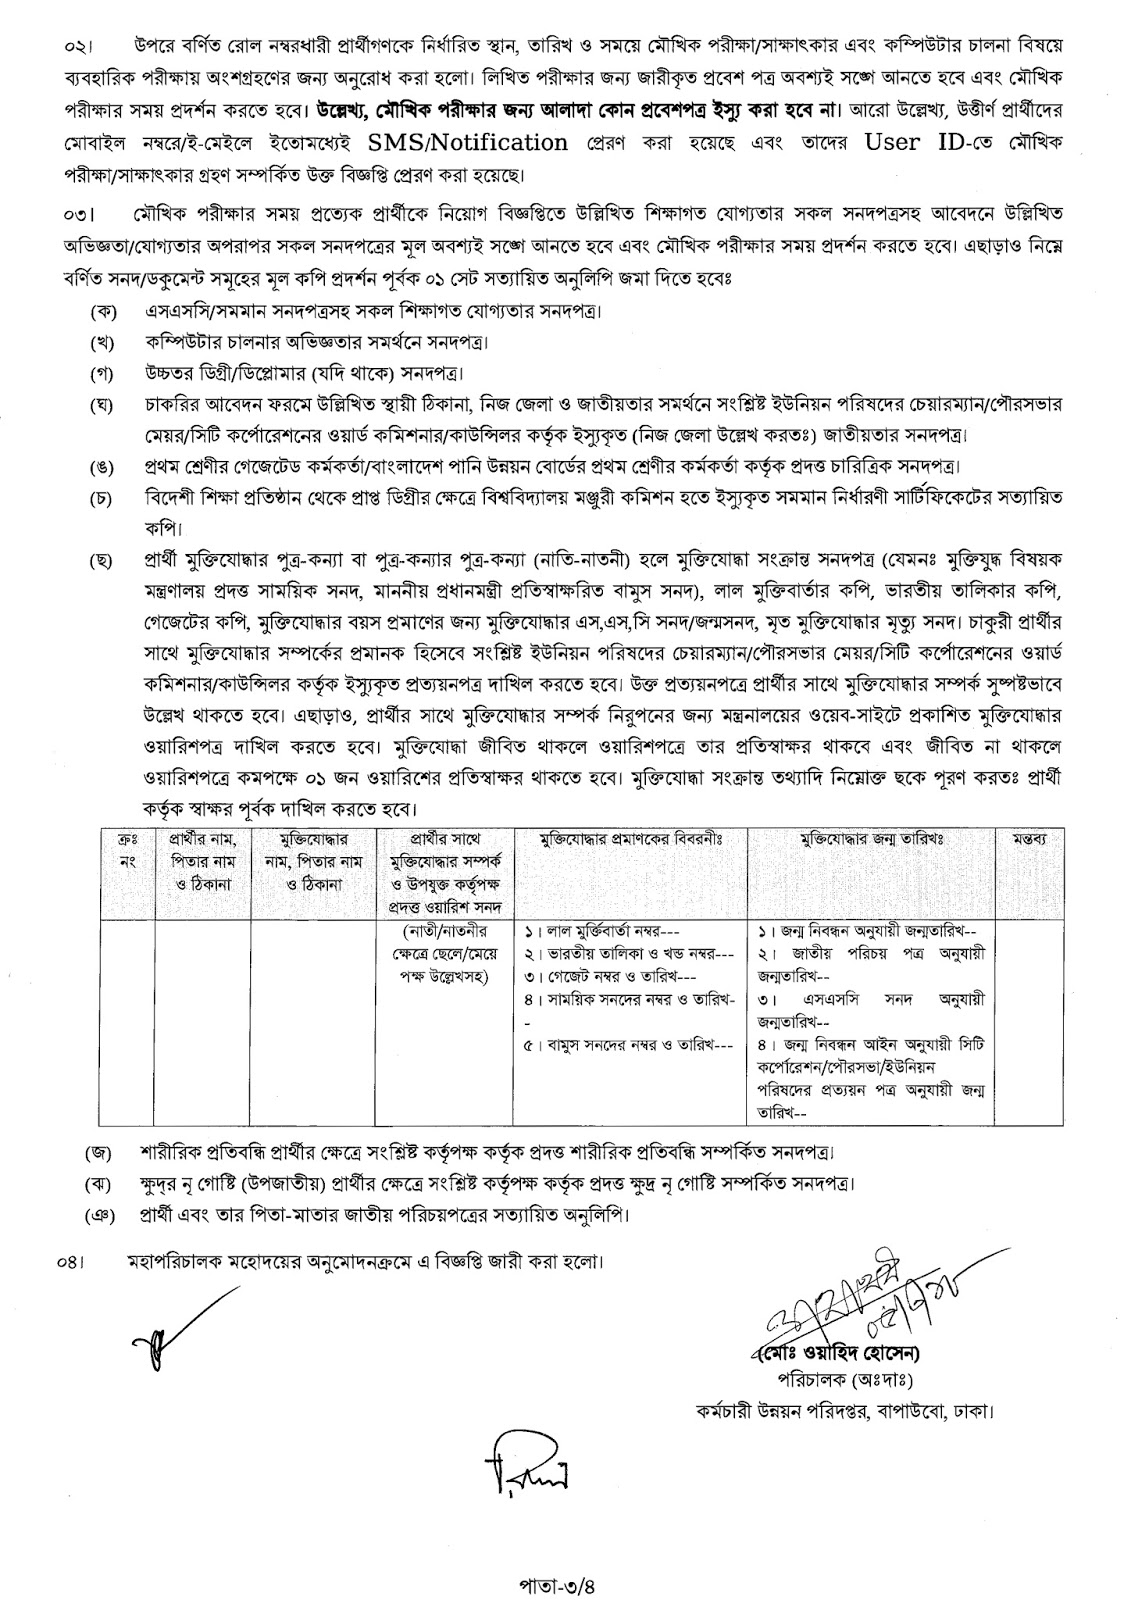 Bangladesh Water Development Board (BWDB) Assistant Engineer (Pur) Recruitment Viva exam date, time and seat plan